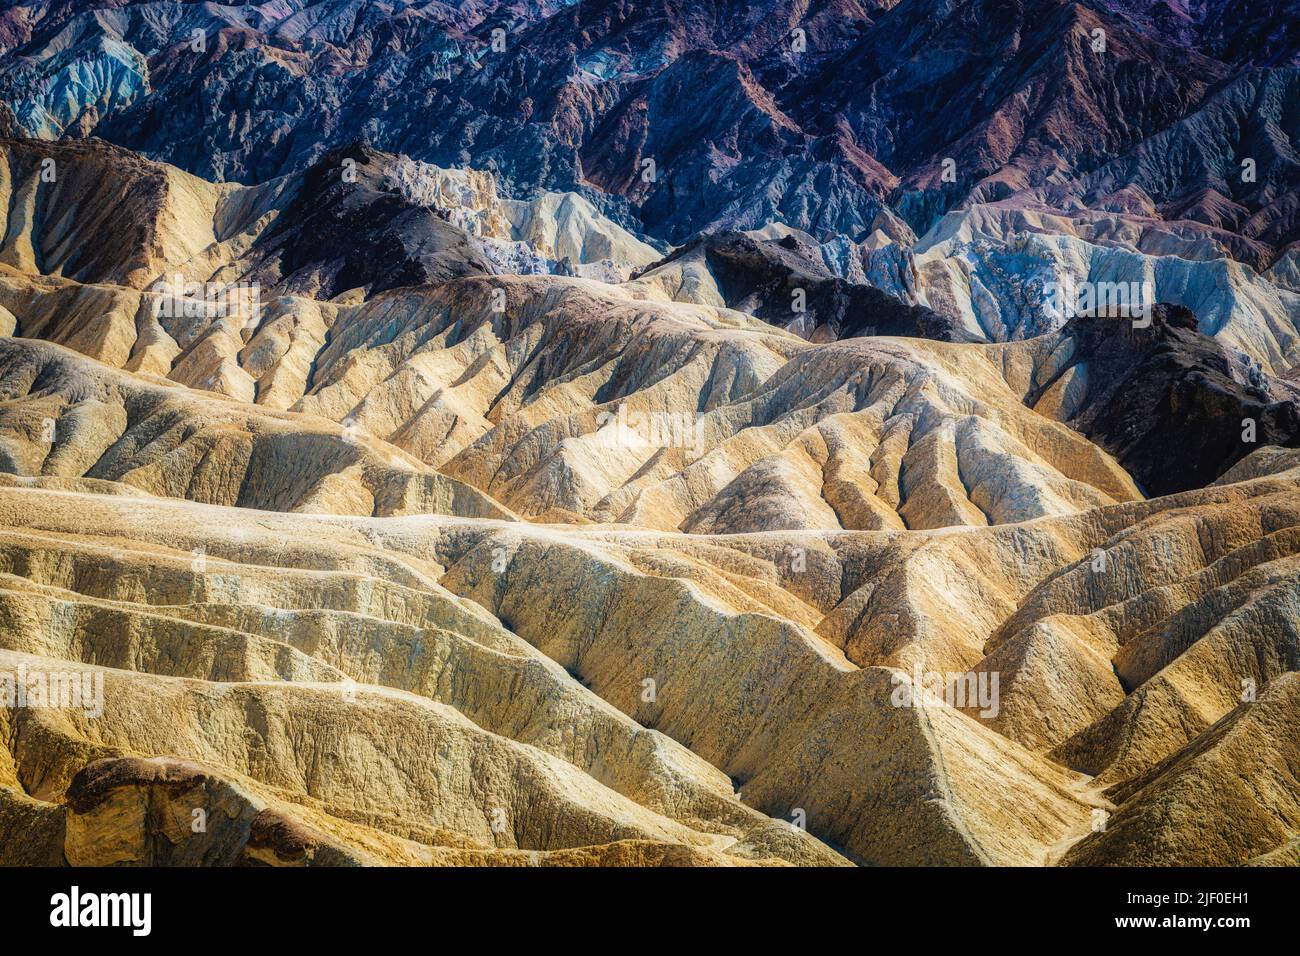 The eroded formations at the edges of Death Valley National Park, California. Stock Photo